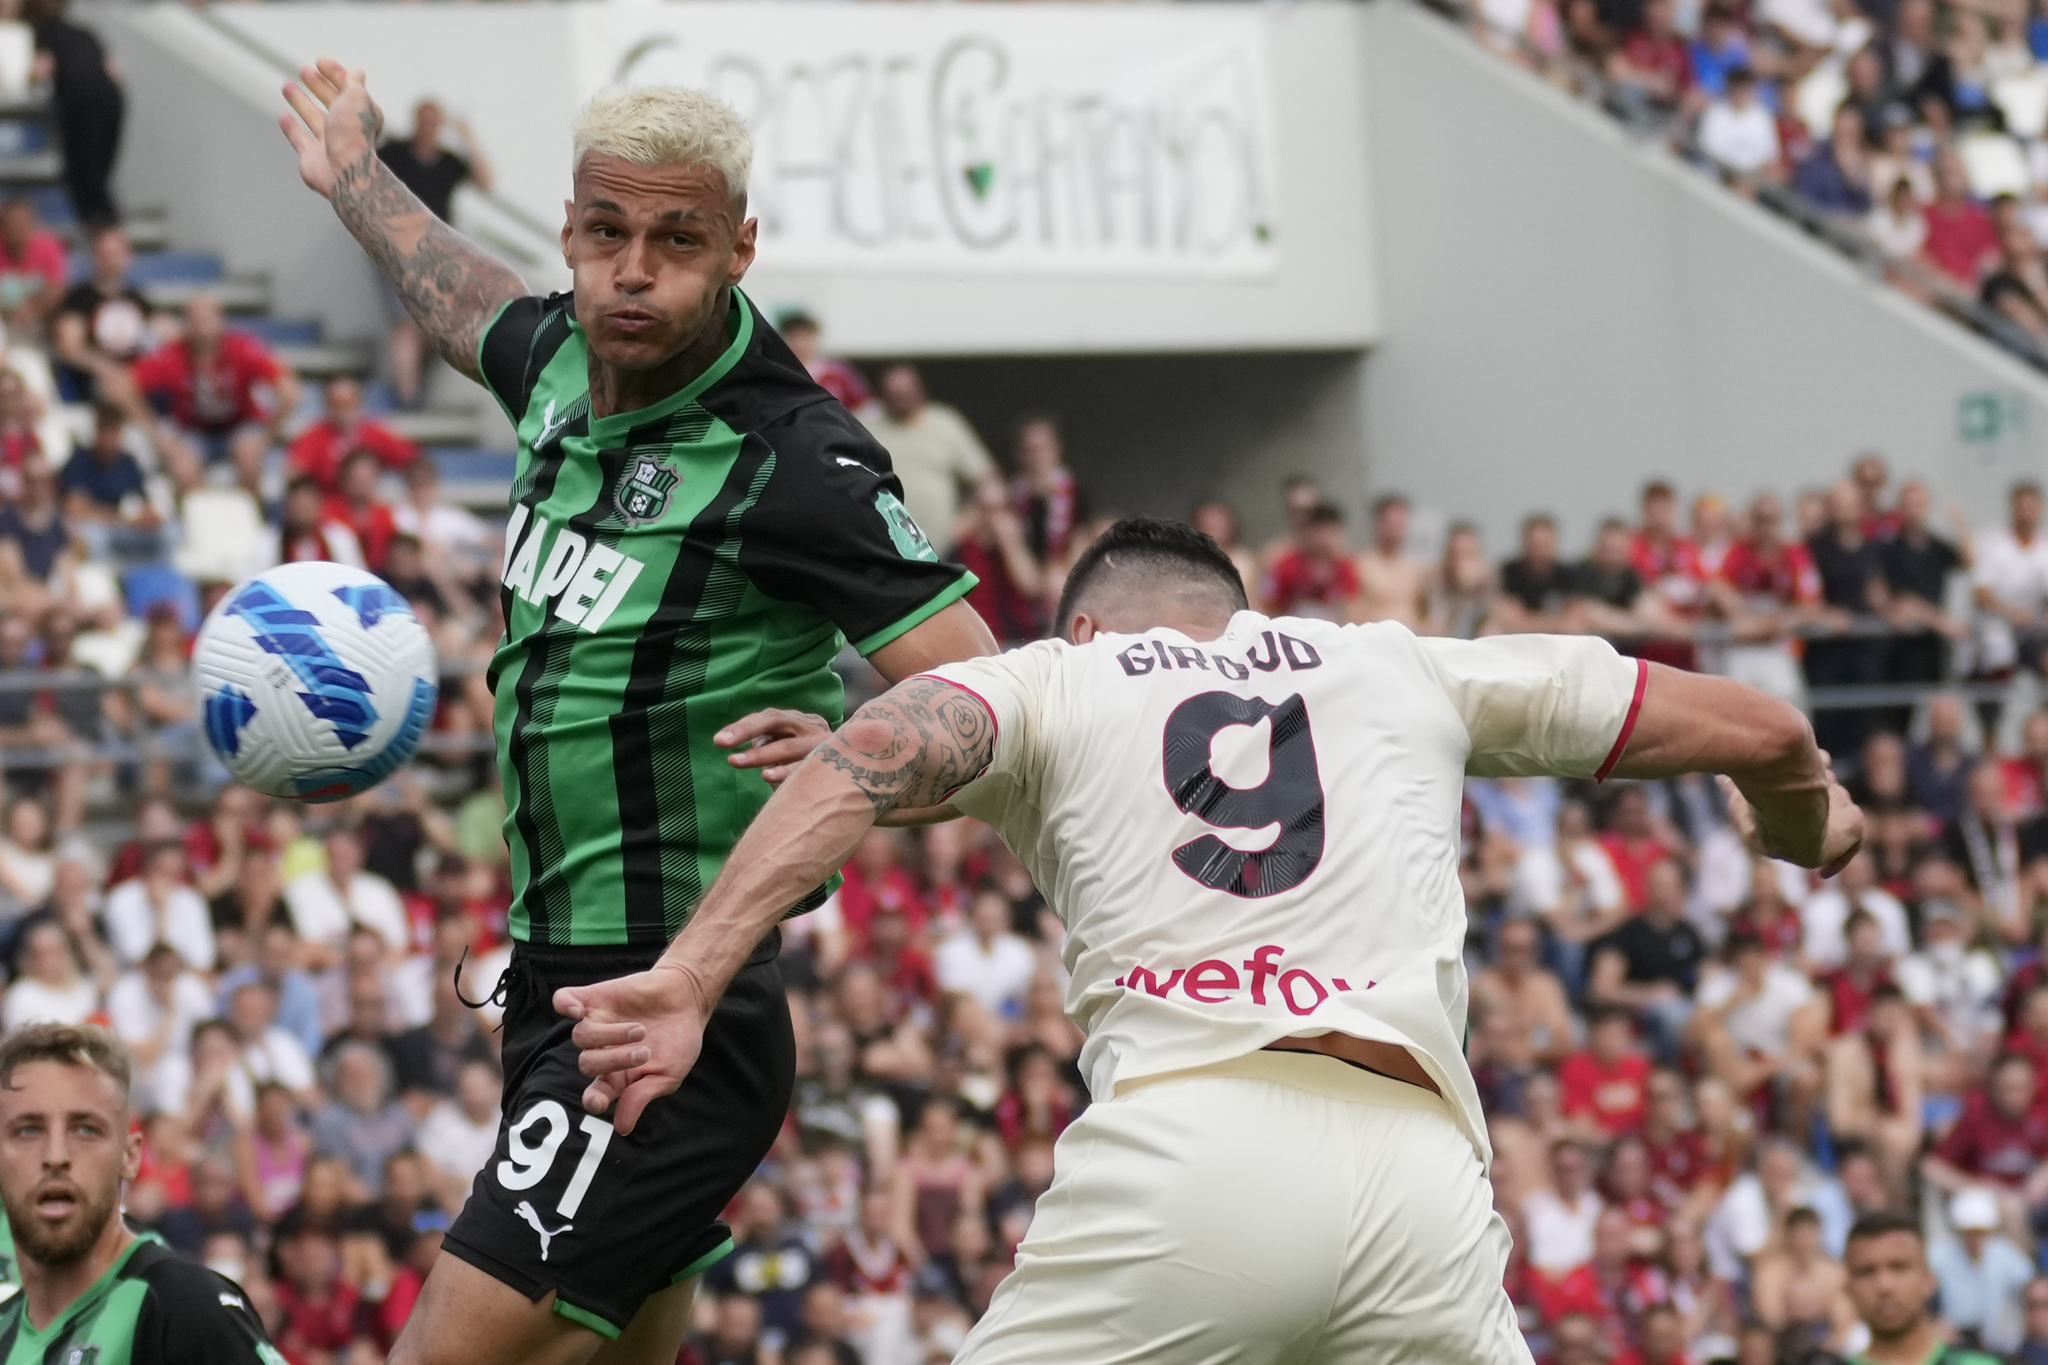 Sassuolo's Gianluca Scamacca, left, and AC  lt;HIT gt;Milan lt;/HIT gt;'s Olivier Giroud jump for the ball during the Serie A soccer match between Sassuolo and AC  lt;HIT gt;Milan lt;/HIT gt; at the Citta del Tricolore stadium, in Reggio Emilia, Italy, Sunday, May 22, 2022. (AP Photo/Antonio Calanni)